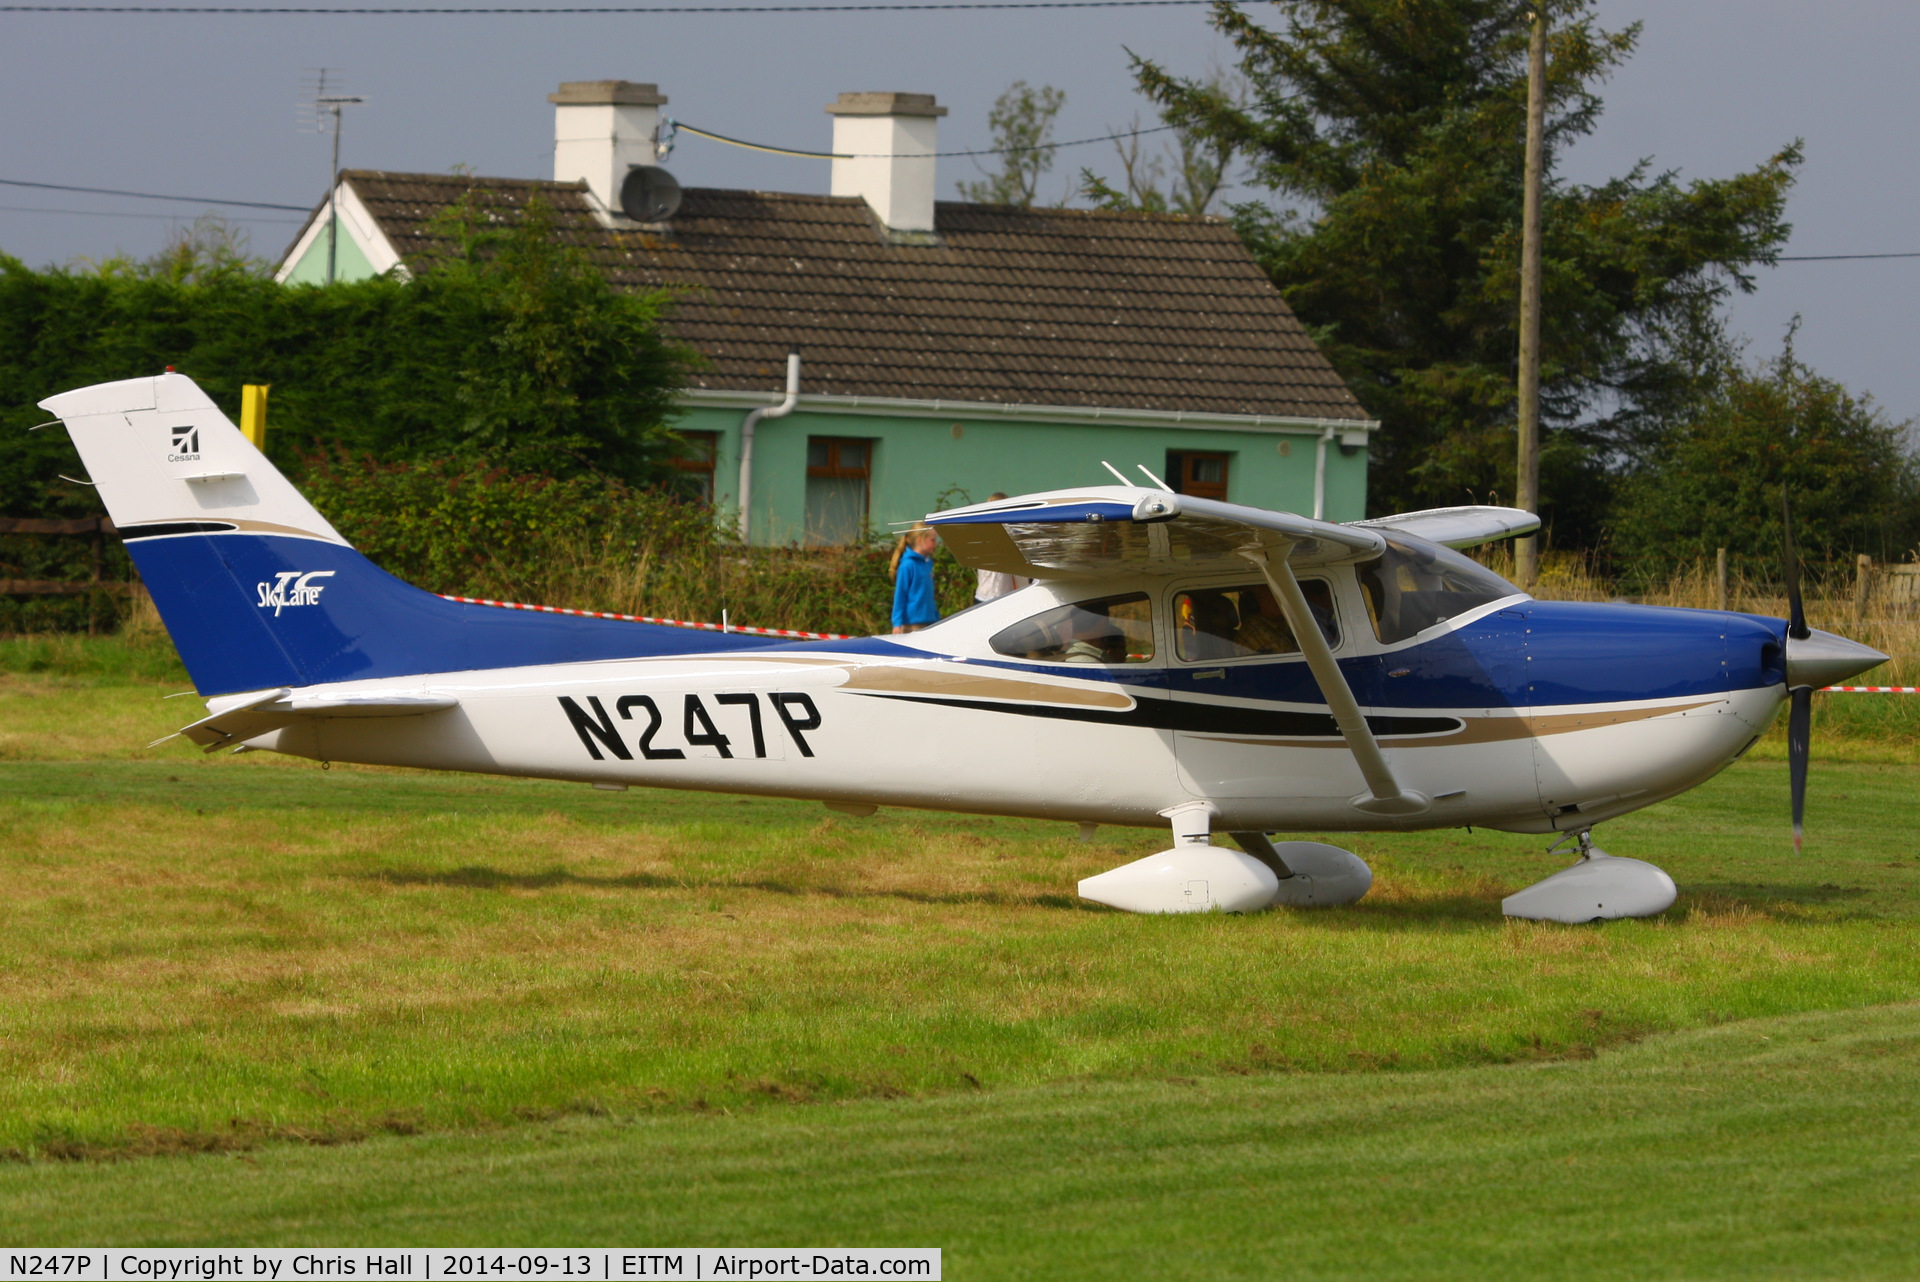 N247P, 2004 Cessna T182T Turbo Skylane C/N T18208280, at the Trim airfield fly in, County Meath, Ireland